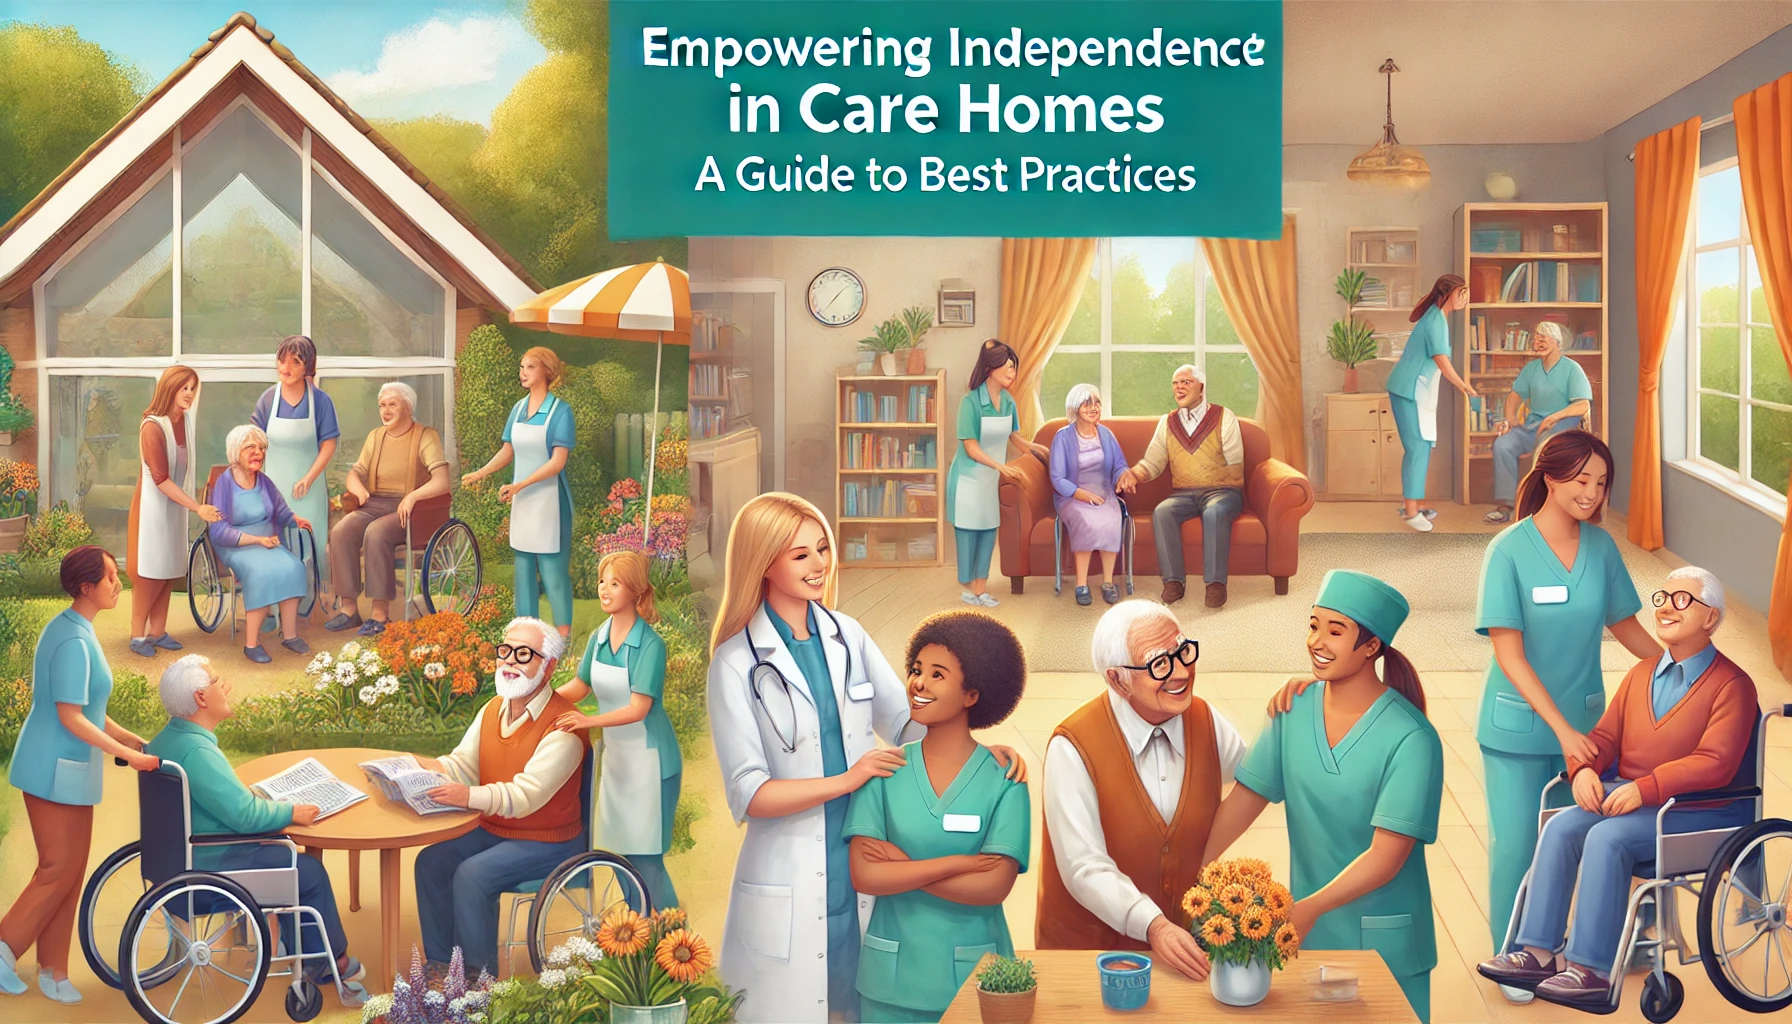 Empowering Independence in Care Homes: A Guide to Best Practices